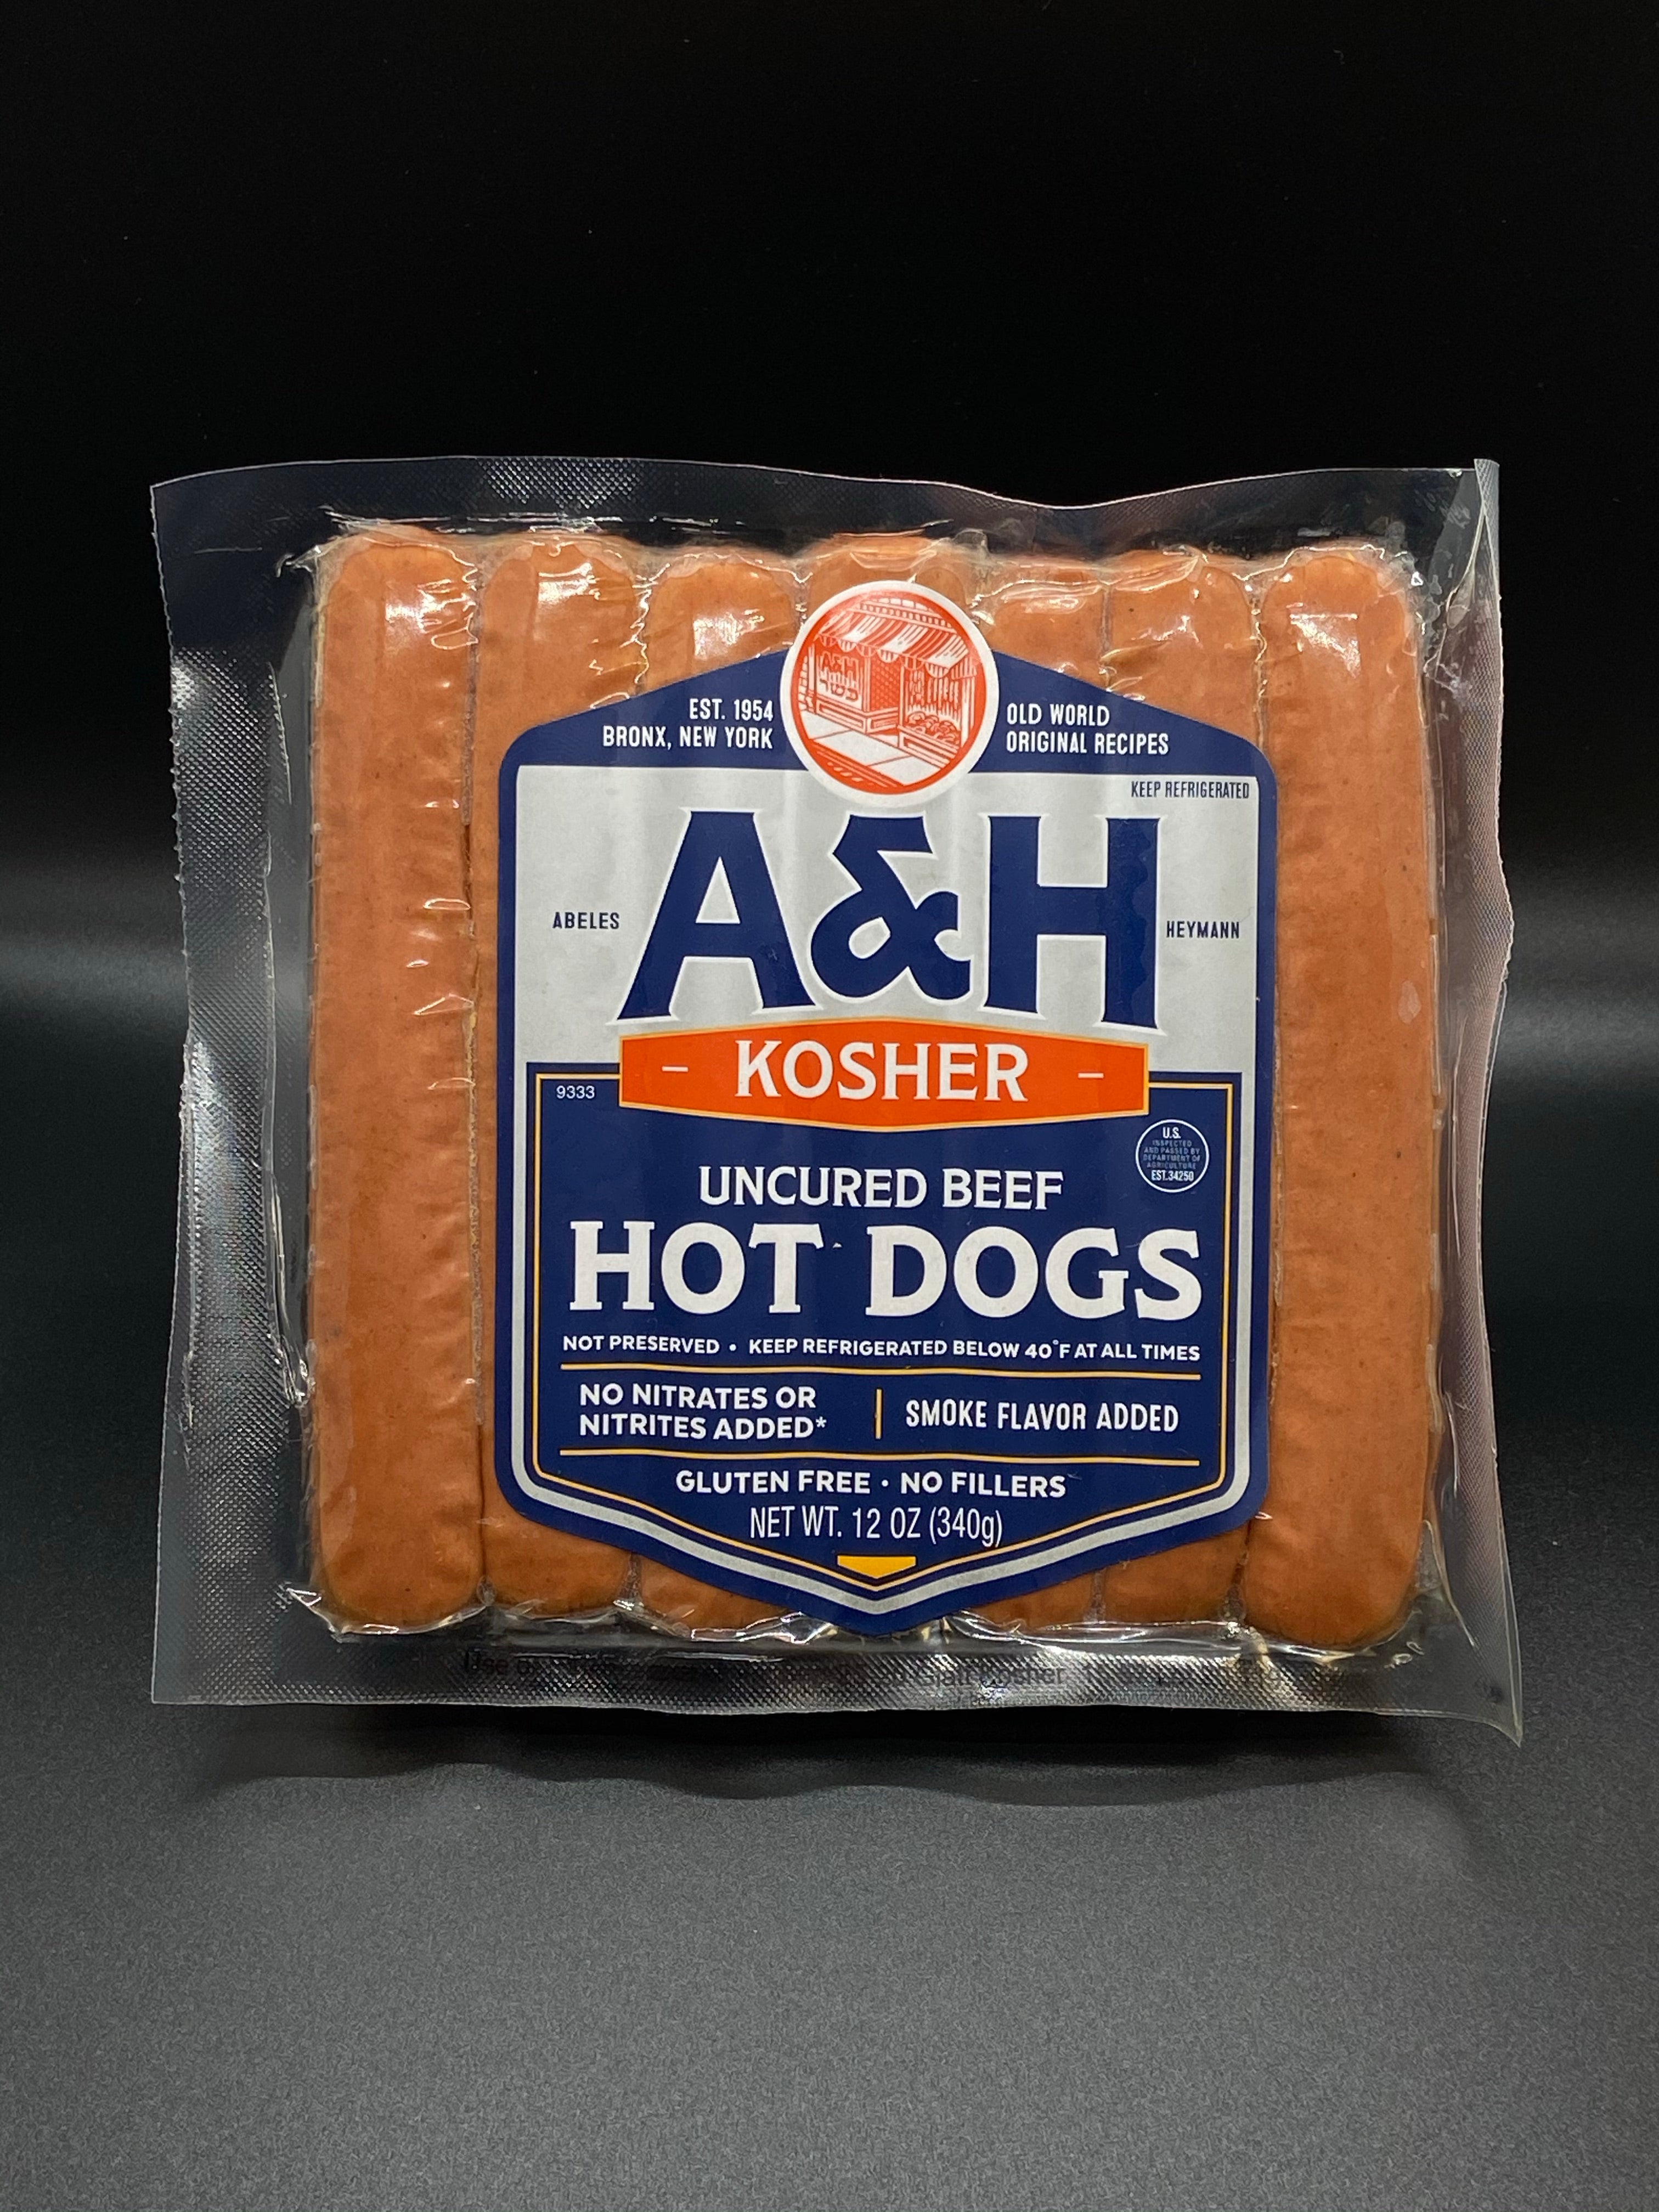 Are Hot Dogs Kosher? 